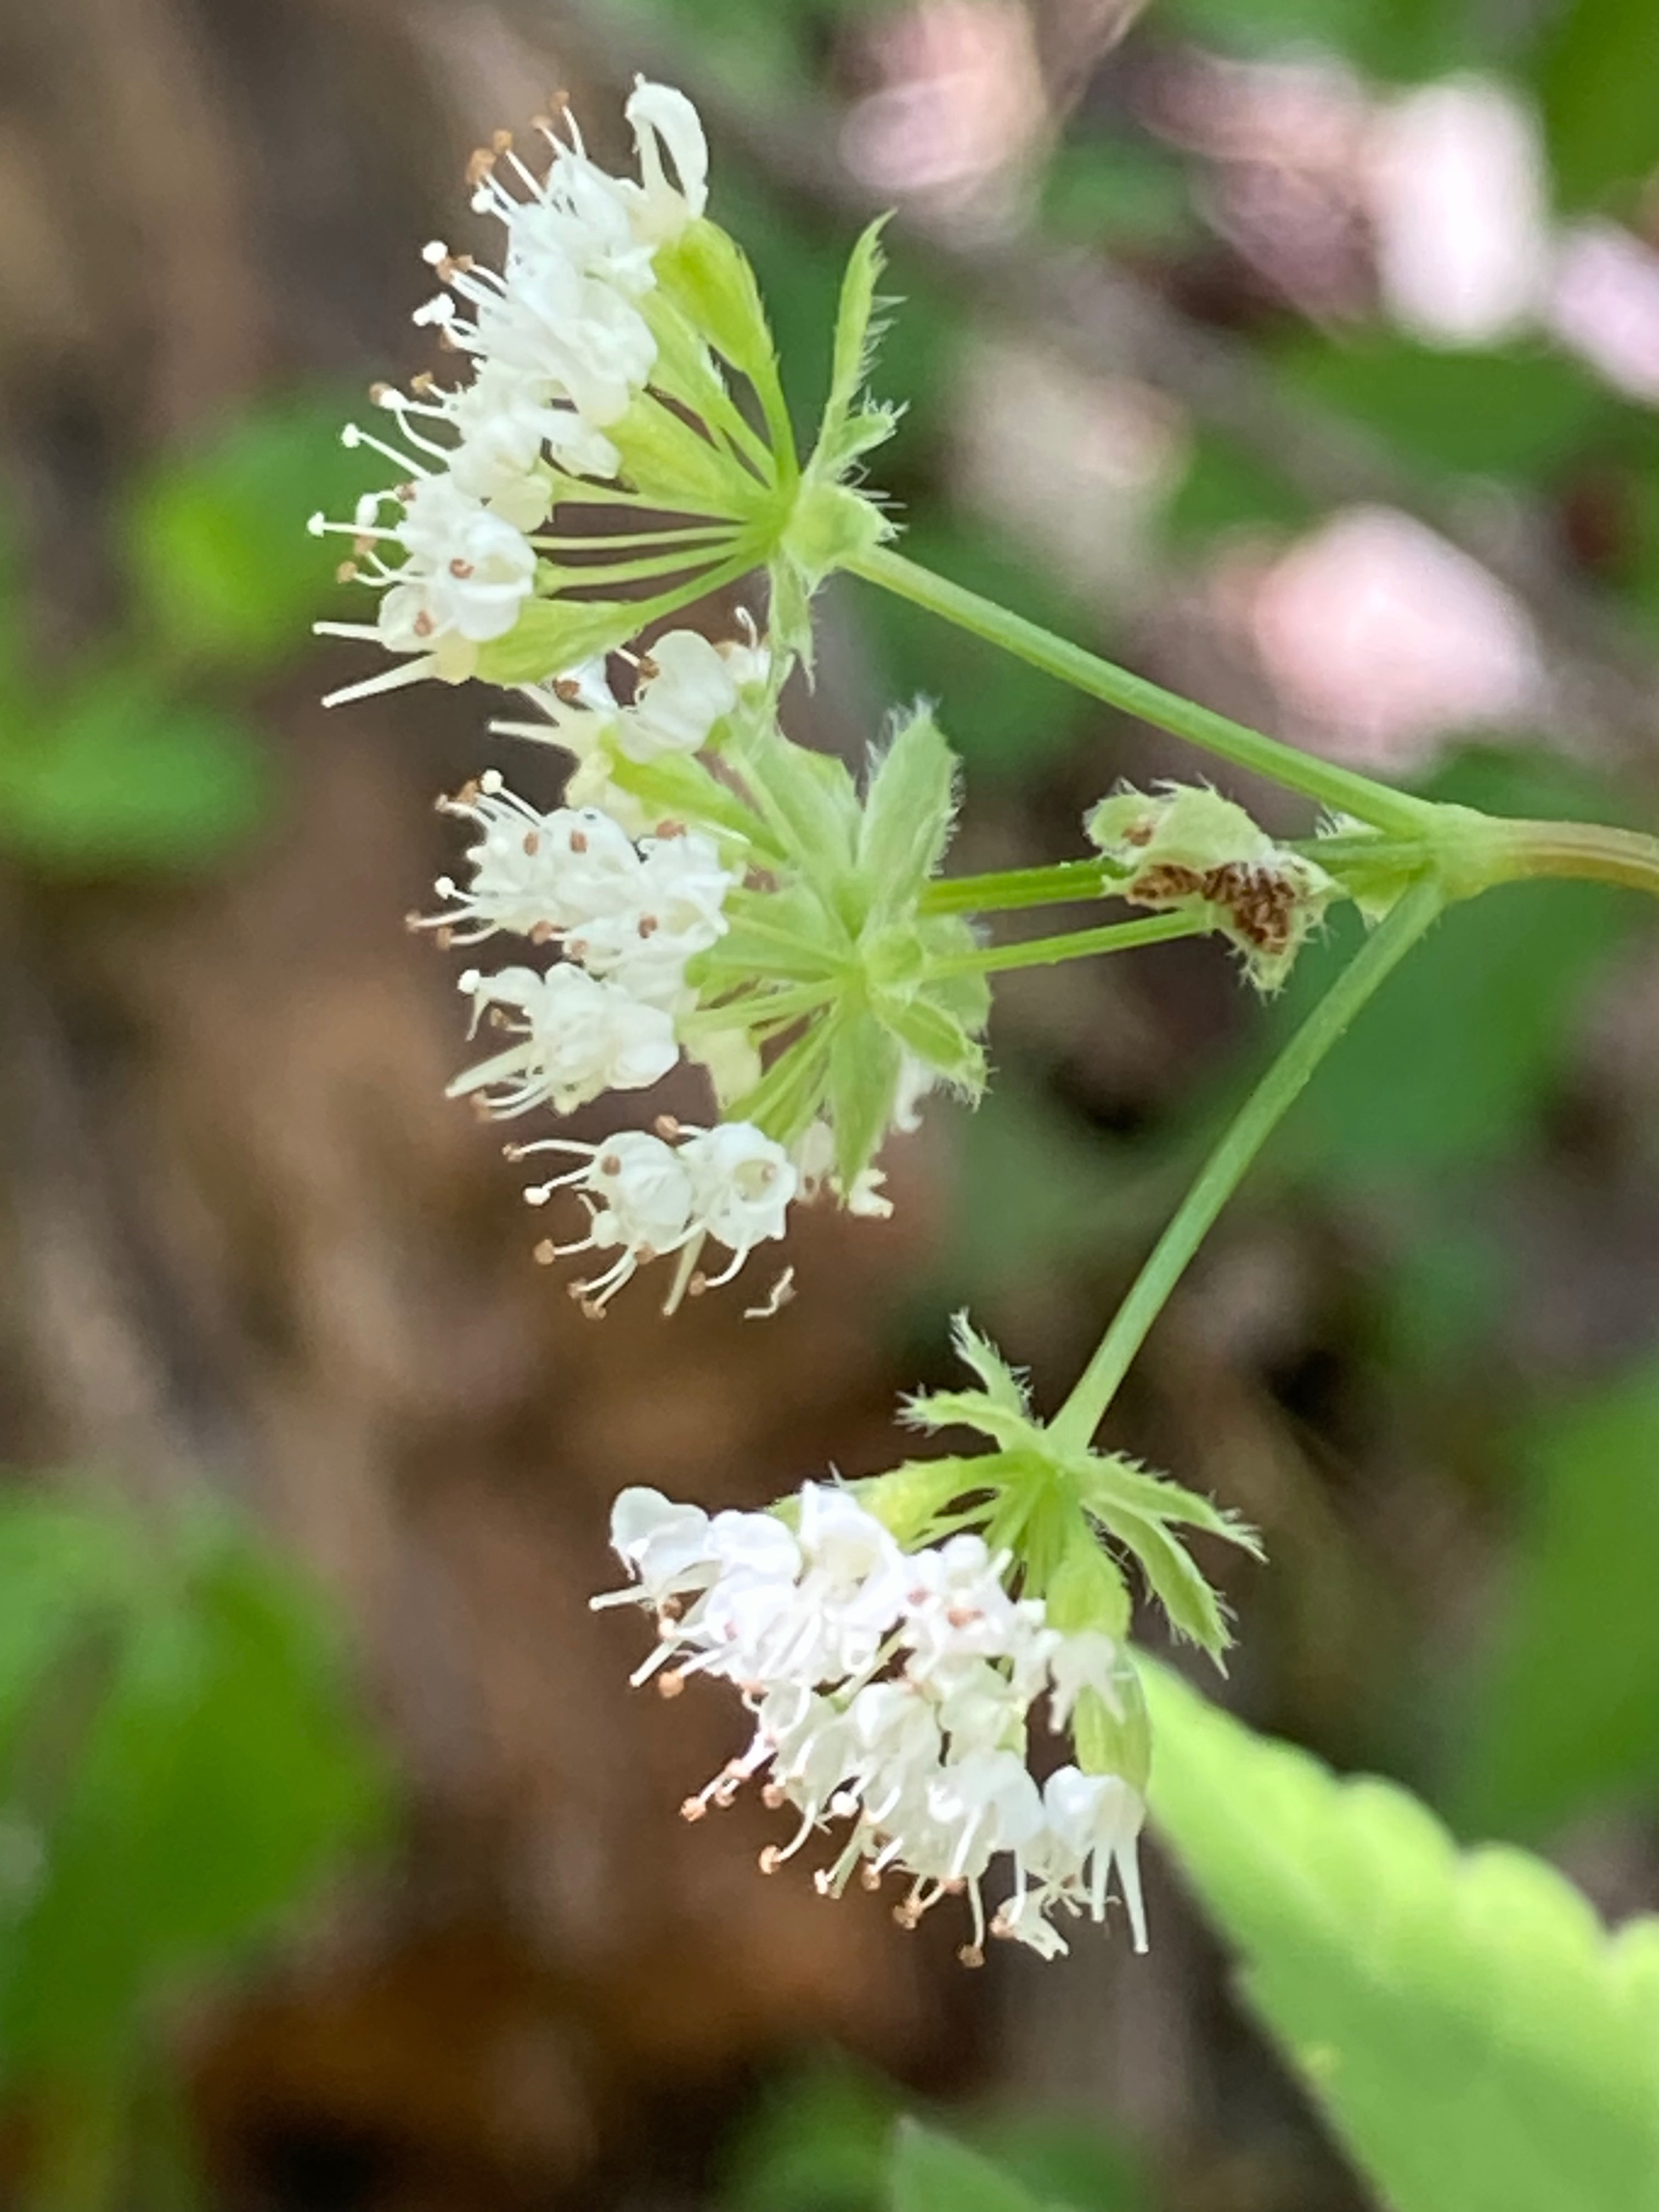 The Scientific Name is Osmorhiza longistylis. You will likely hear them called Anise-root, Sweet Cicely, Smooth Sweet Cicely, Longstyle Sweetroot, Licorice Root, Wild Anise. This picture shows the Each umbel is made up of about 4-6 umbellets, with each umbellet having 8-16 tiny white, 5-petaled flowers. of Osmorhiza longistylis